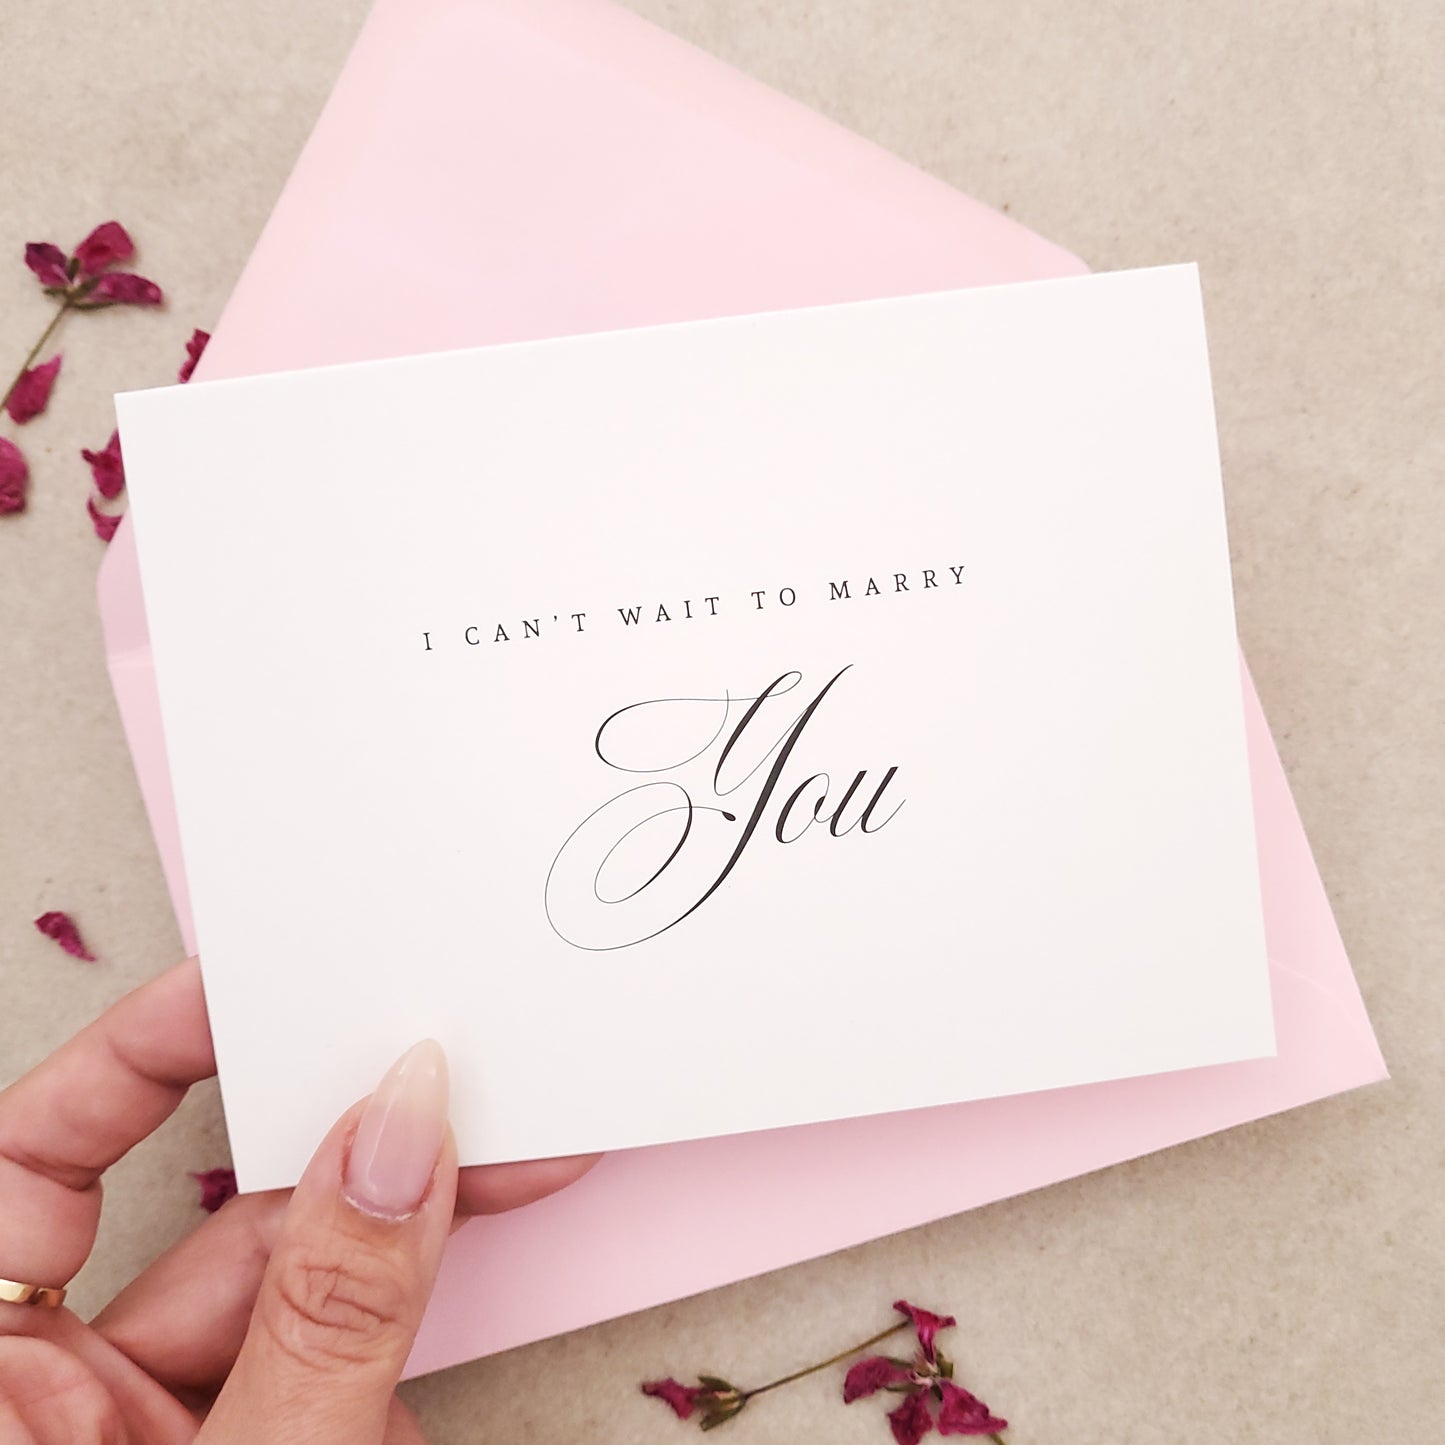 I can't wait to marry you wedding day note cards - XOXOKristen 